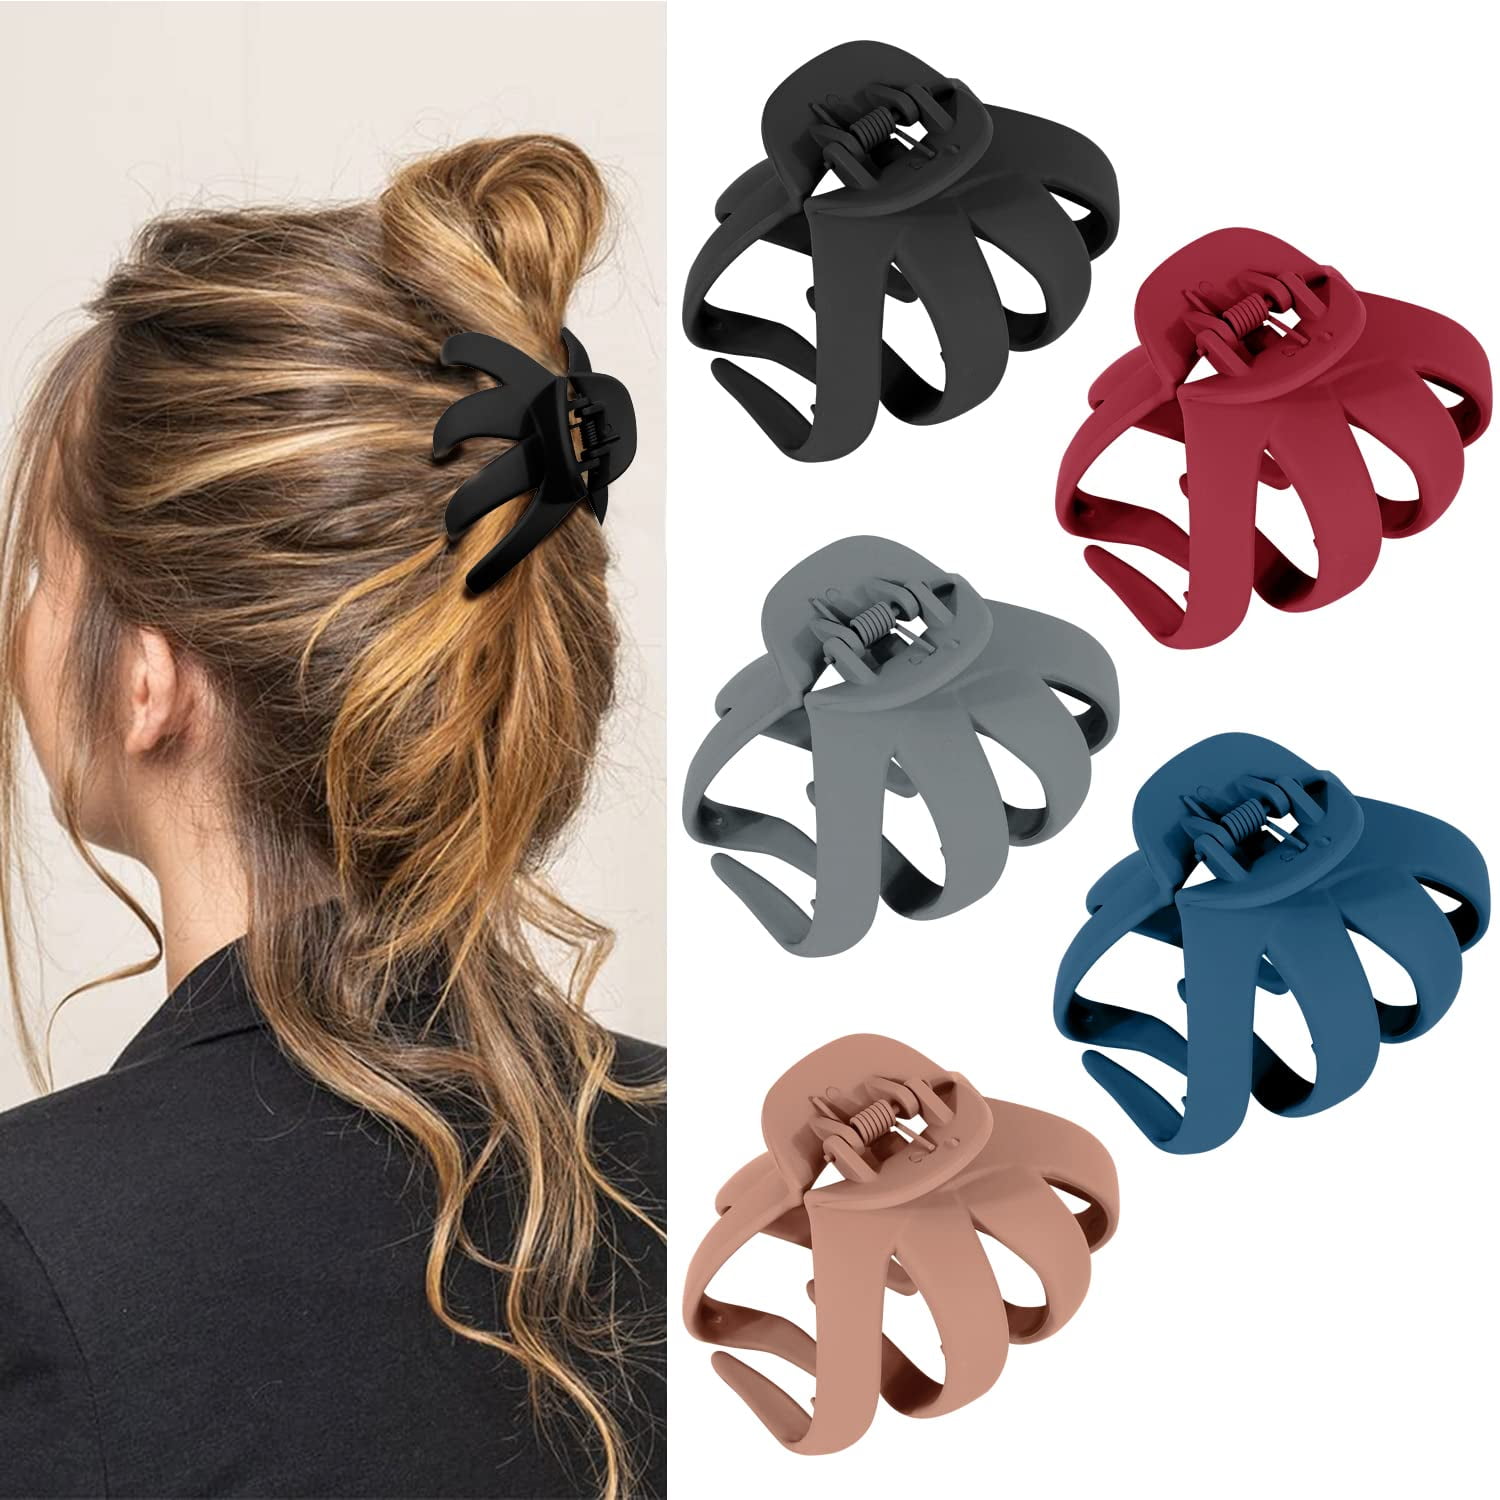 Pompotops 5 Pcs Big Hair Claw Clips for Women Girls 4.33 Inch Nonslip Matte  Strong Hold Hair Clip Hair Accessories 